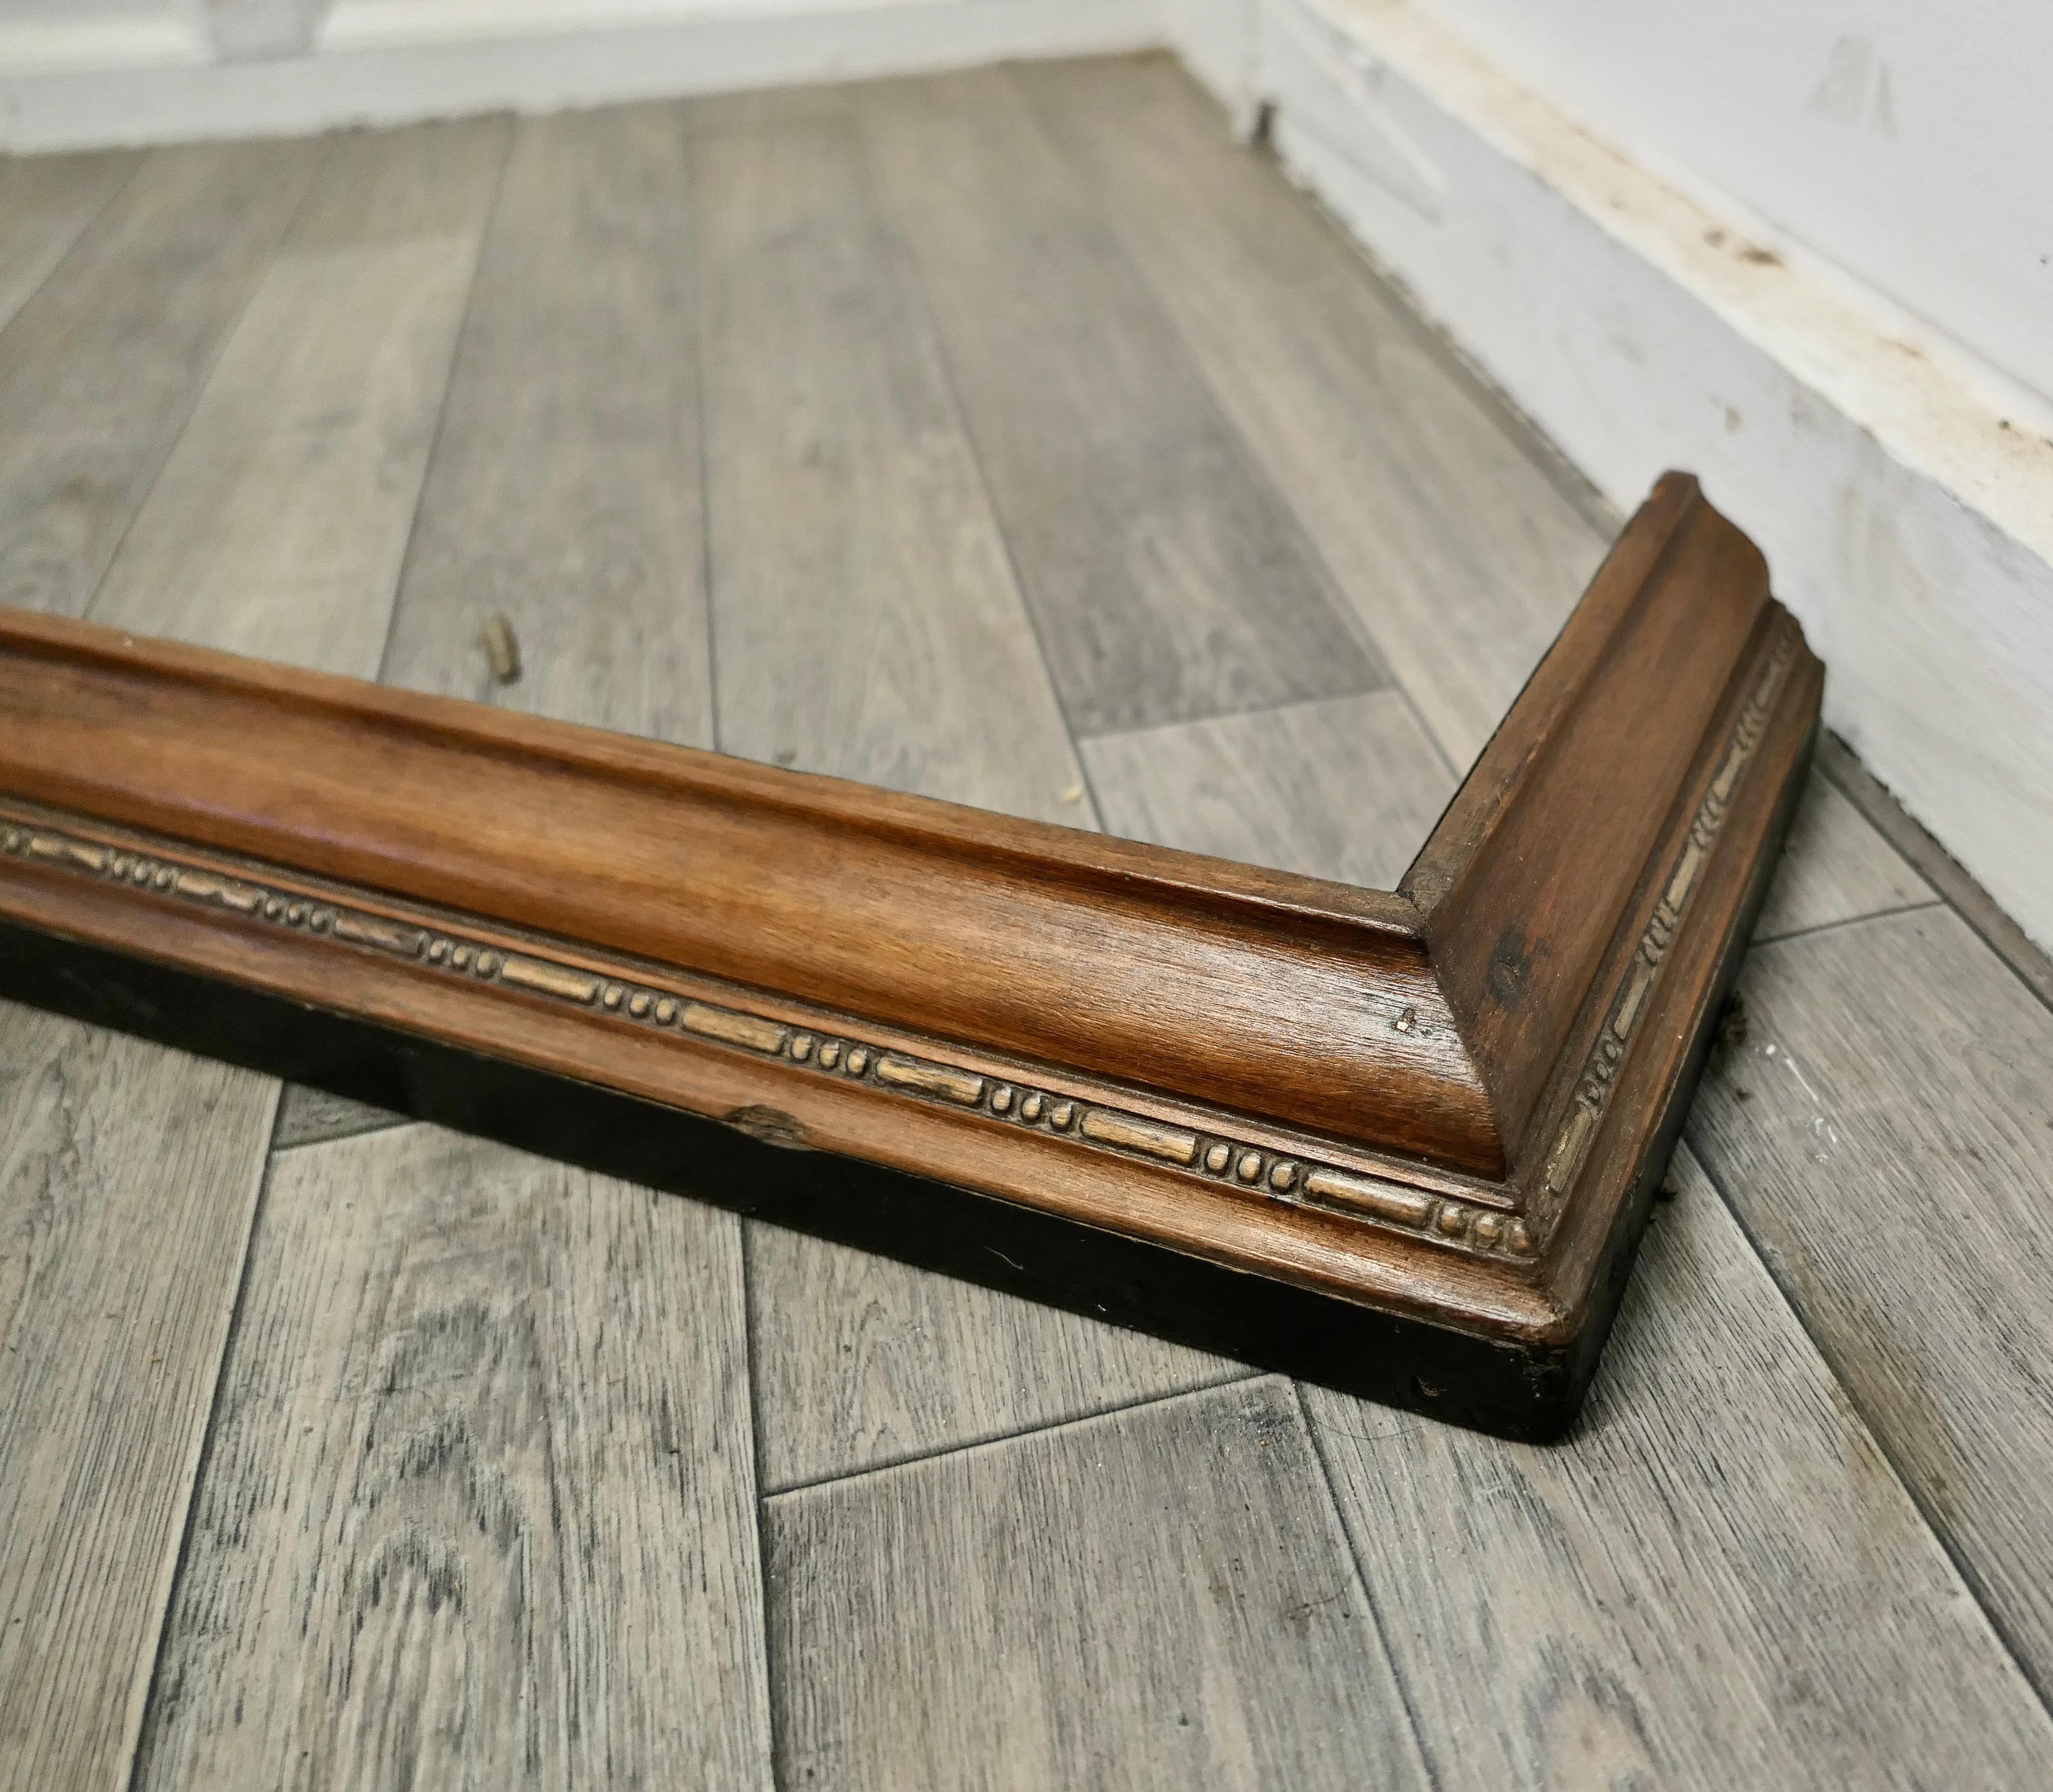 Arts and Crafts walnut Fender, fire surround

This is an attractive solid Walnut Fender it is is carved in the Arts and Crafts style 

The Fender is in good condition, it is 3.5” high, and 48” long and 10” deep, 
TJK65.